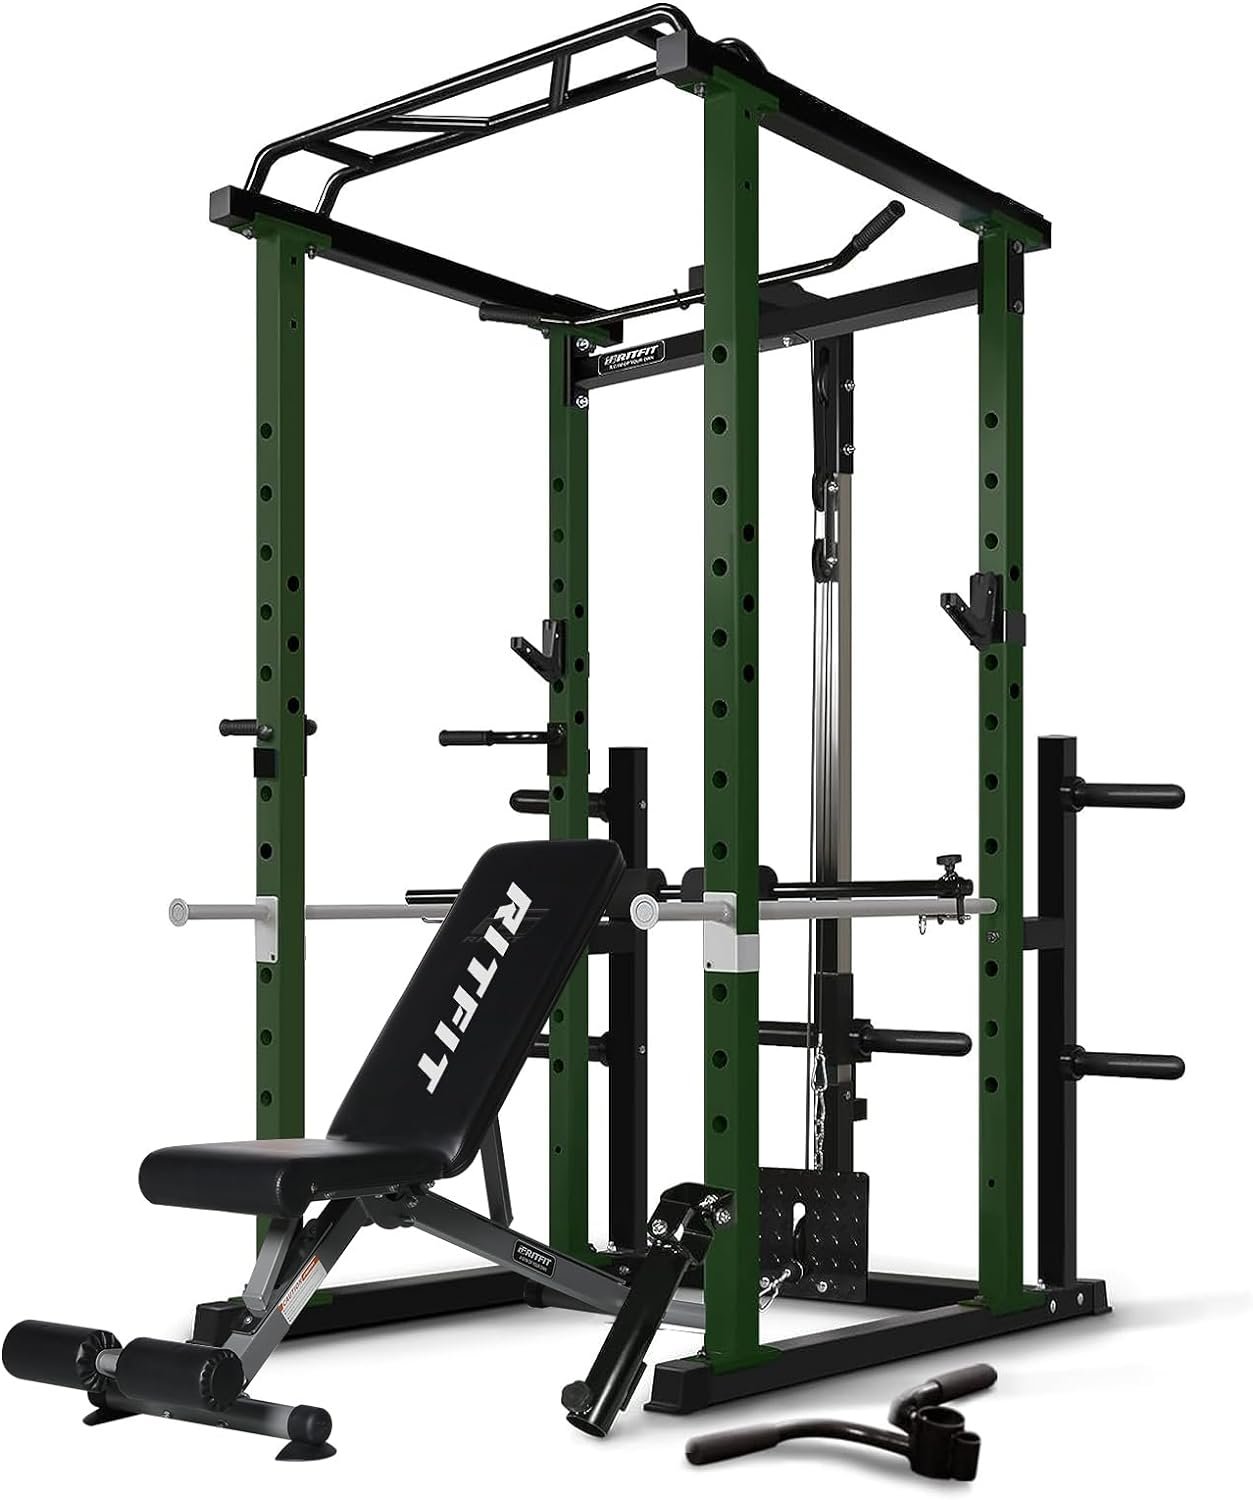 RitFit Power Cage with Optional LAT PullDown/Cable Crossover/Smith Machine System, 1000LB Squat Rack for Home  Garage Gym, with Weight Storage Rack and More Training Attachments, ASTM-Certified